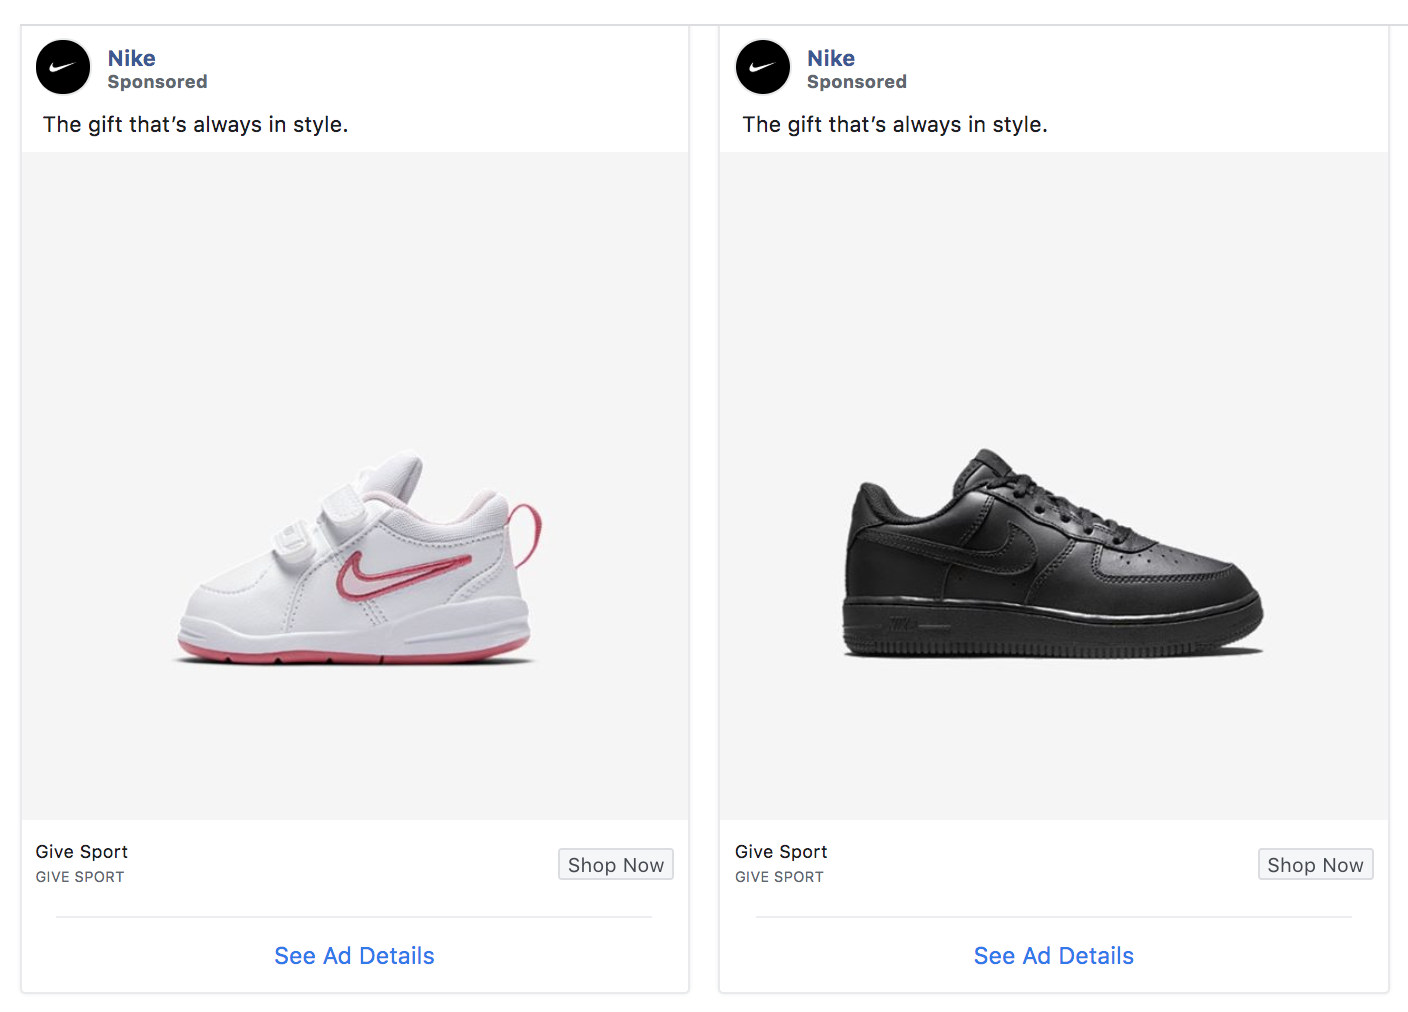 Nike Ads: Learn Their Secret for Driving Sales — Relevantly Facebook Marketing